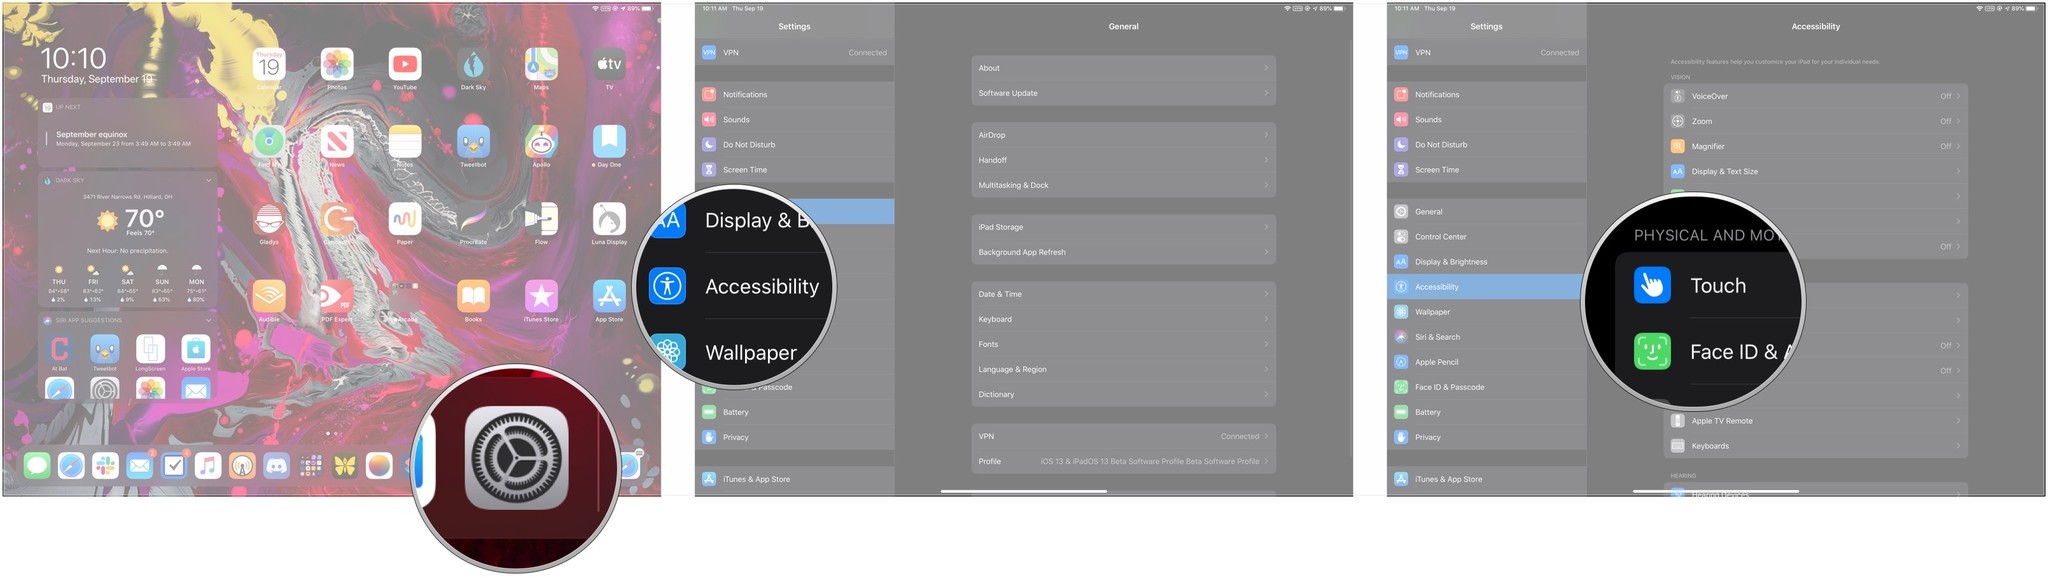 Customize buttons on pointing device on iPad: Open Settings, tap Accessibility, tap Touch